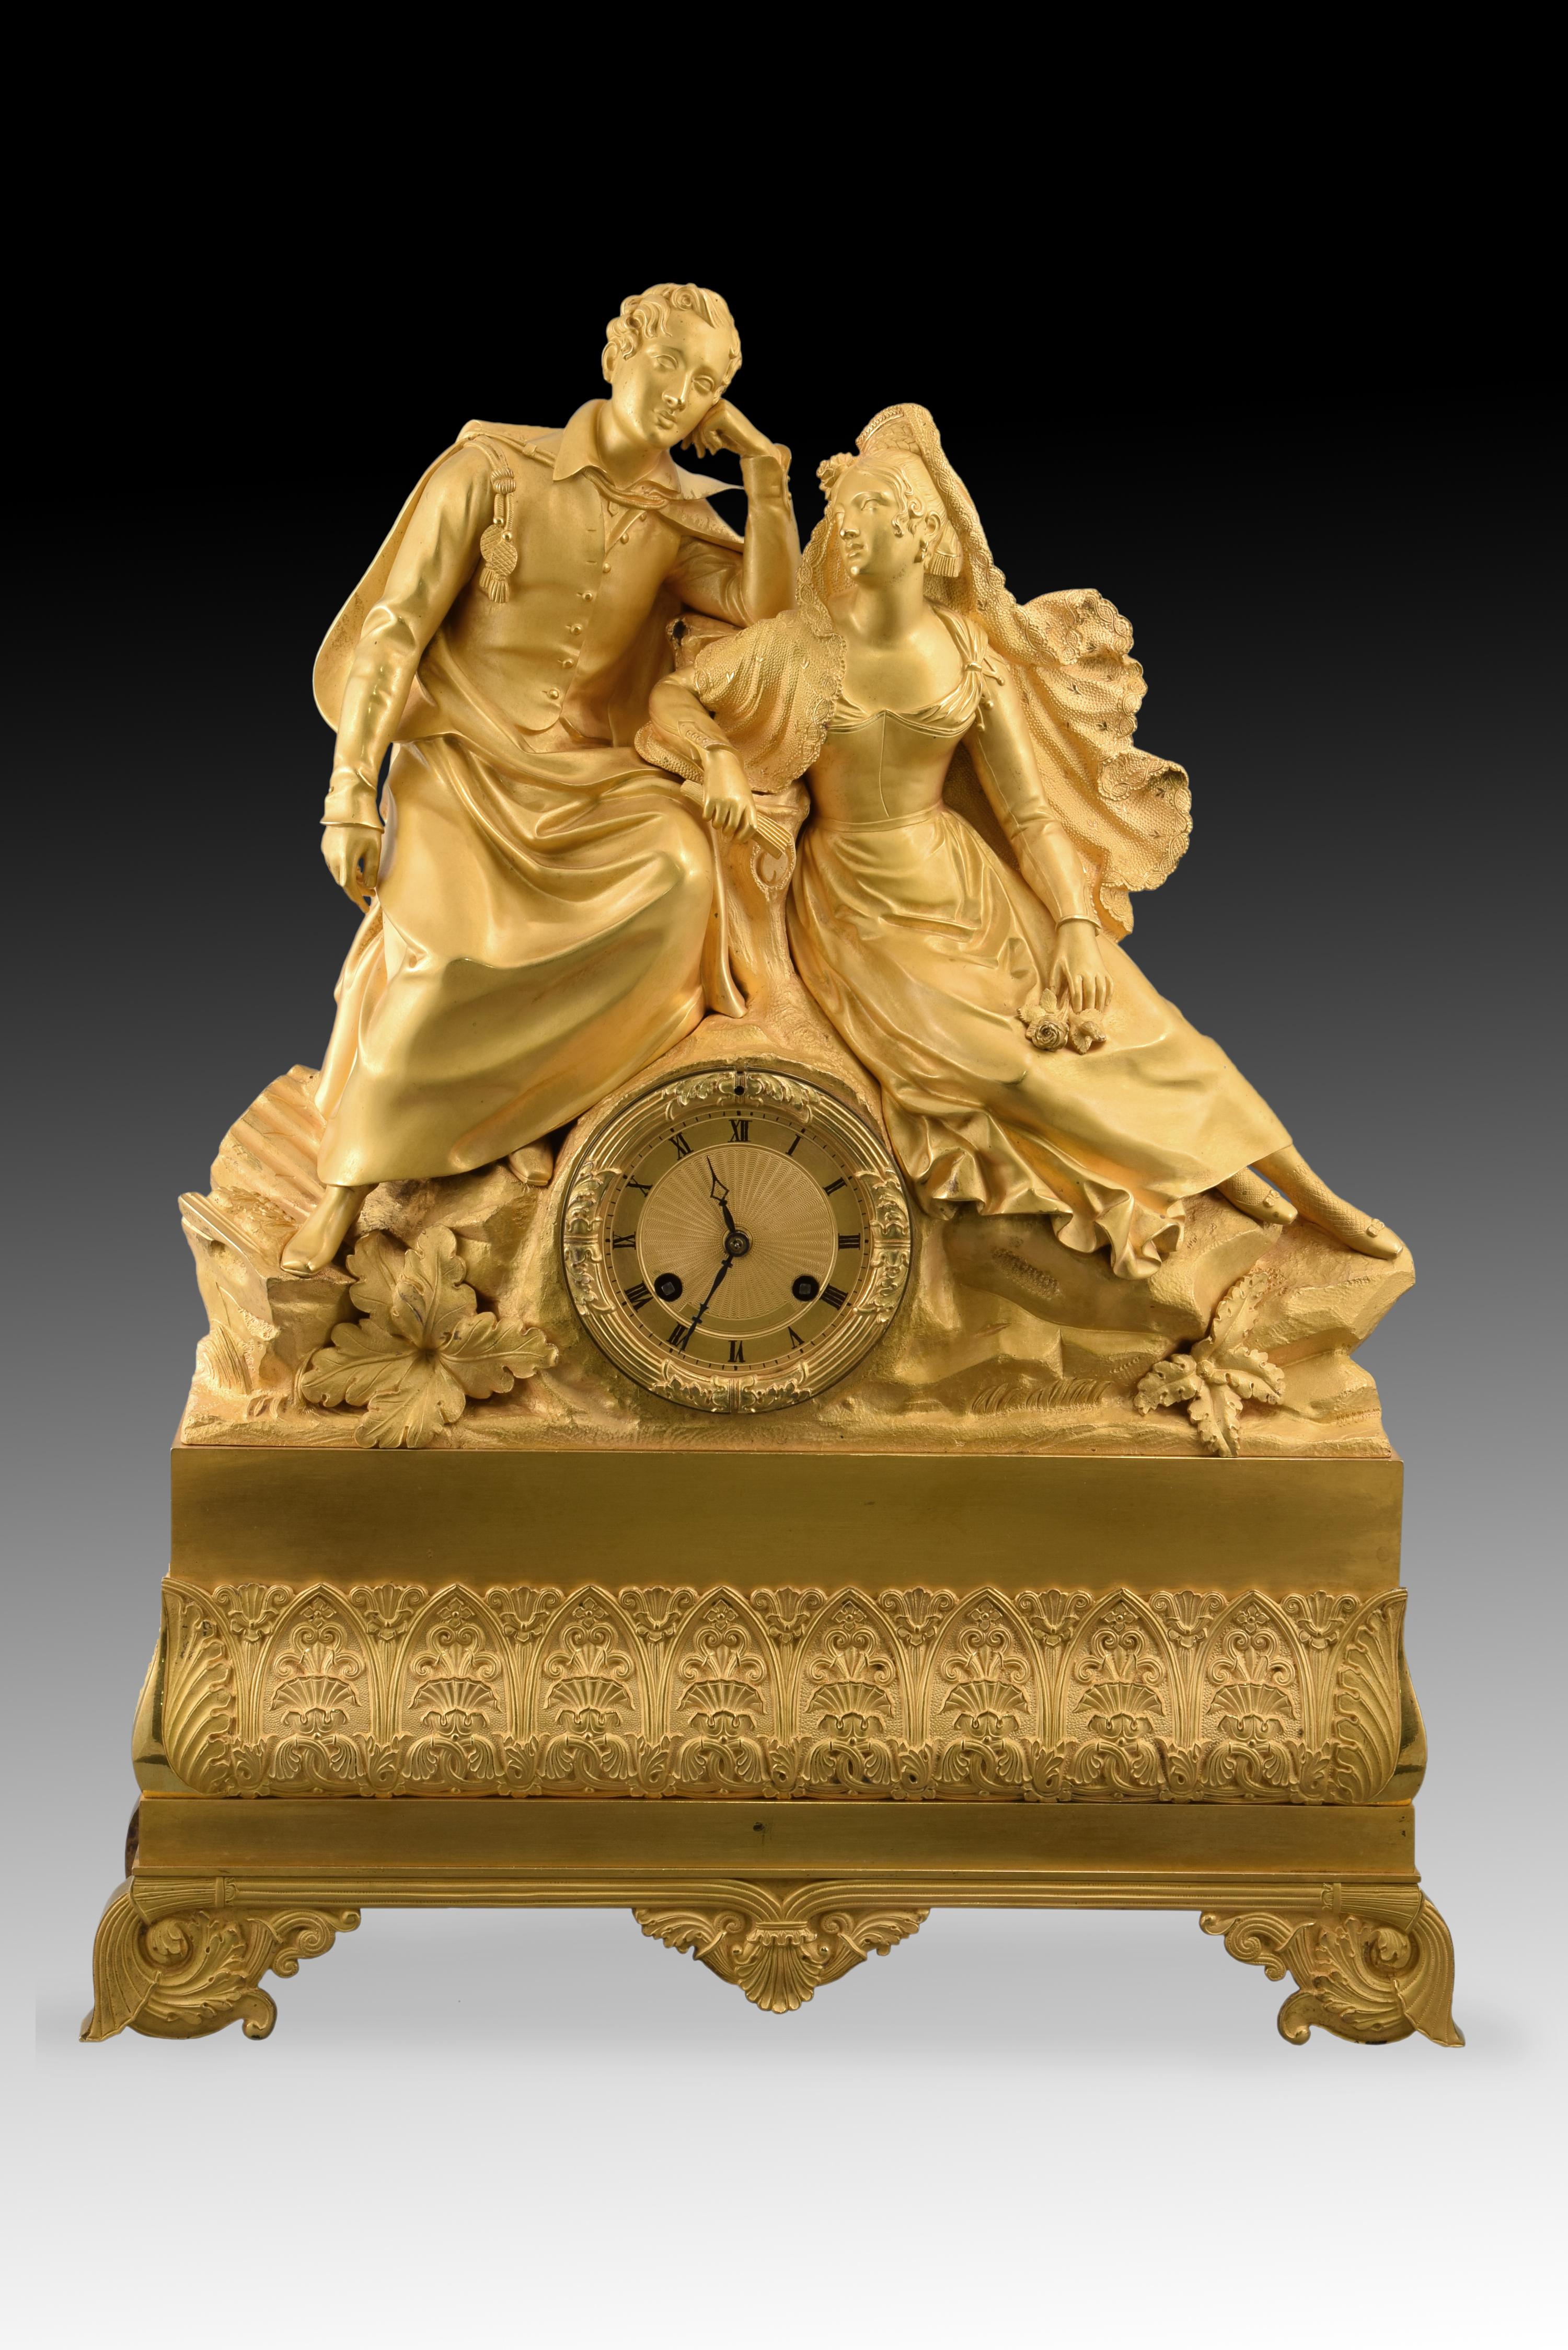 Table clock. Ormolu. XIX century.
 Machinery in working order.
 Table clock with box made of gilt bronze, and Paris machinery in working order. The base is raised on legs decorated with vegetal and architectural elements of clear classicist